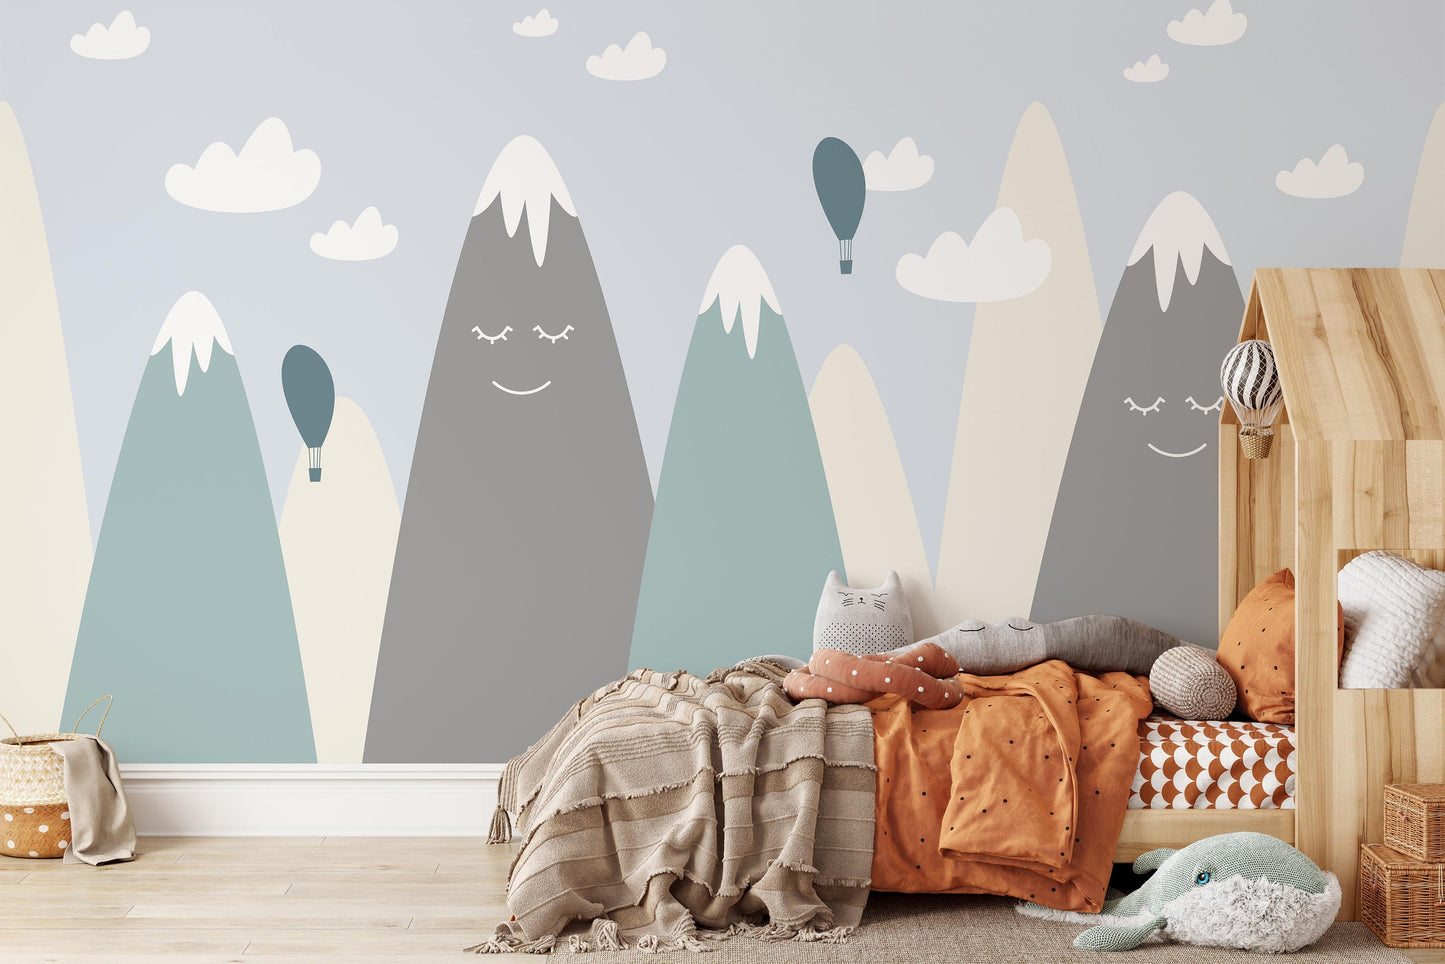 Removable Peel and Stick Wallpaper Funny Mountains Sky Nursery Wall Paper Wall Murals, KL0047